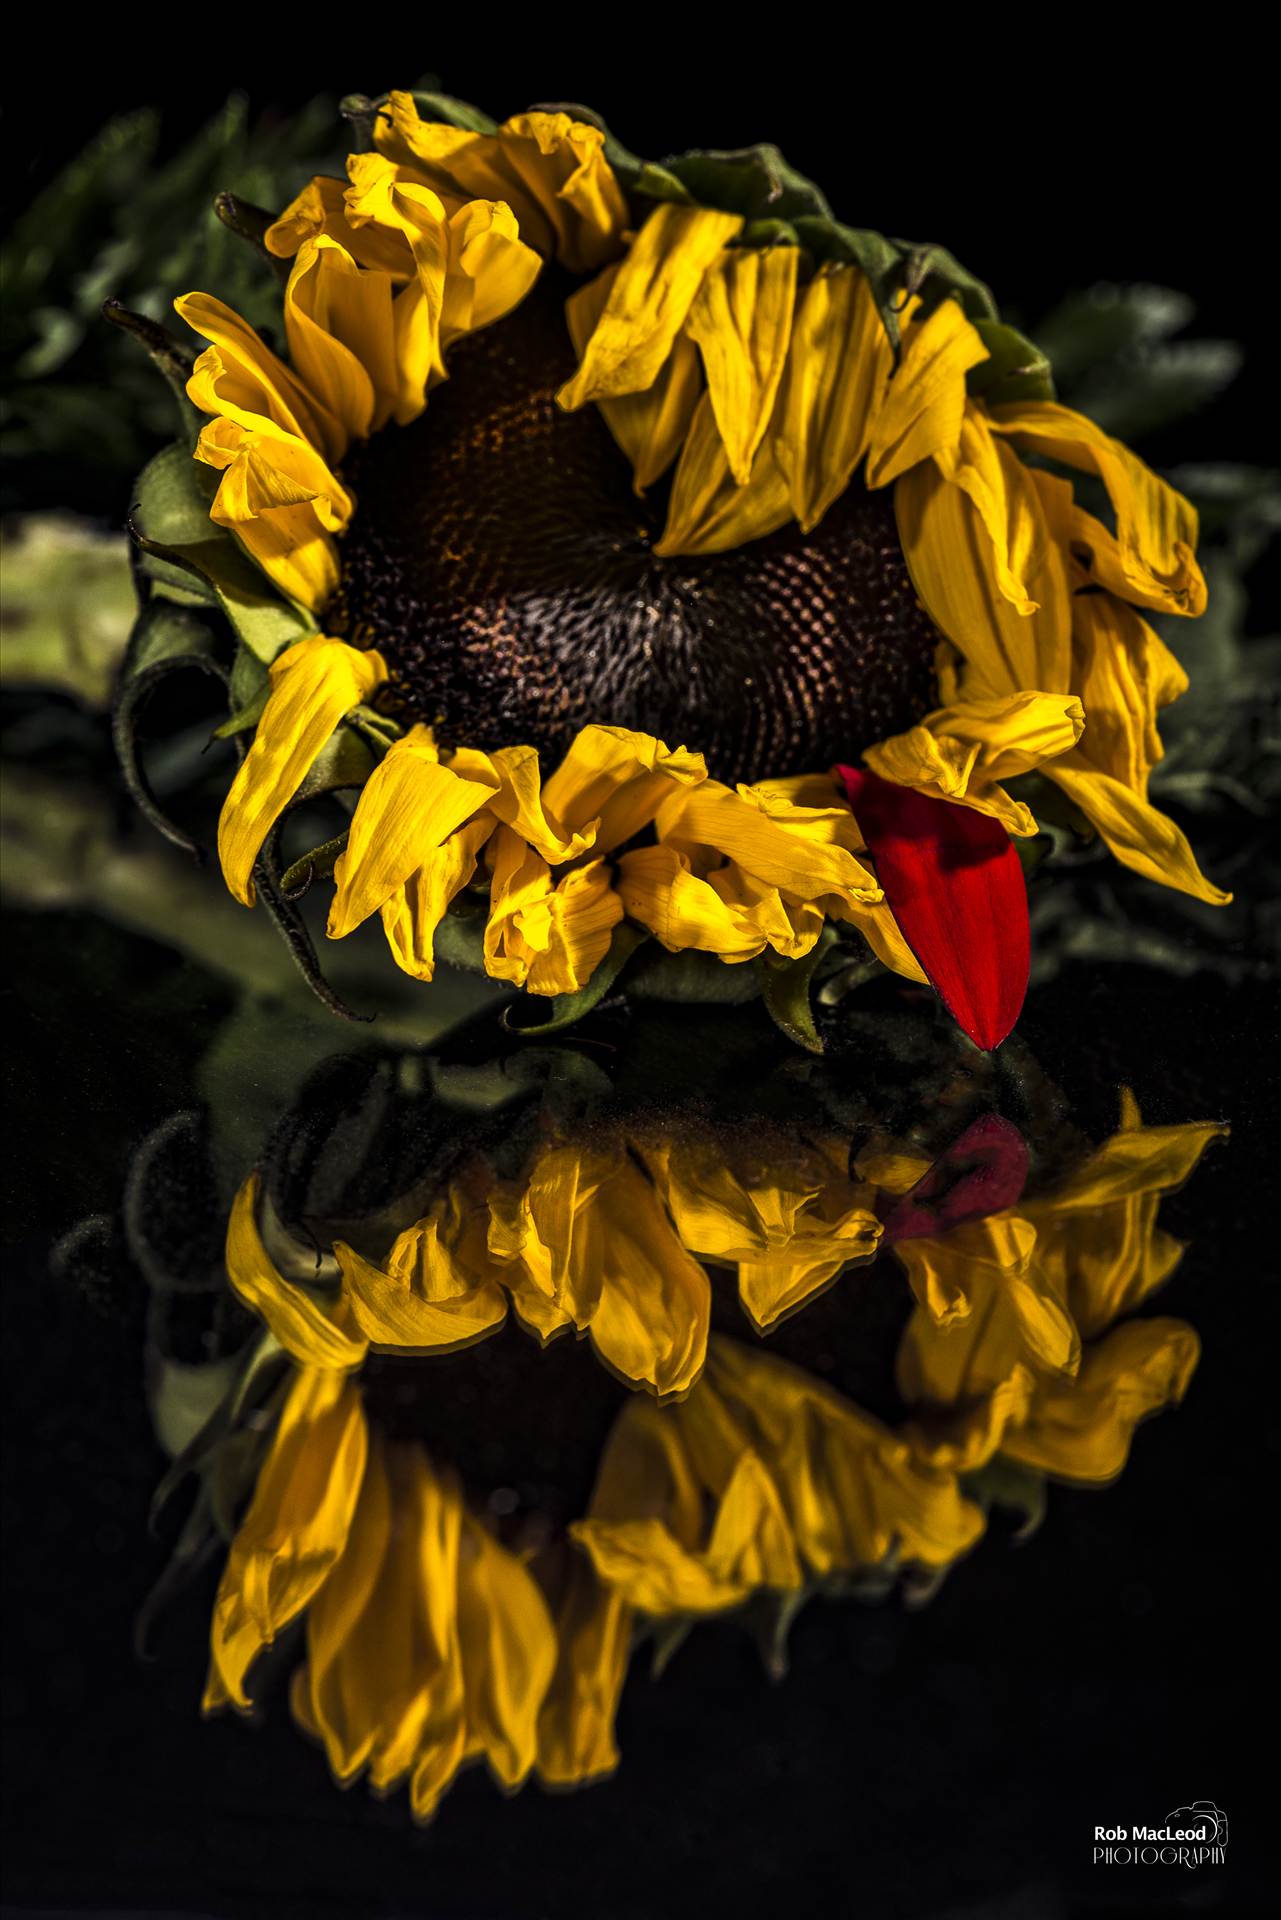 20150923_FLOWERS_6382-Edit.jpg undefined by WPC-289